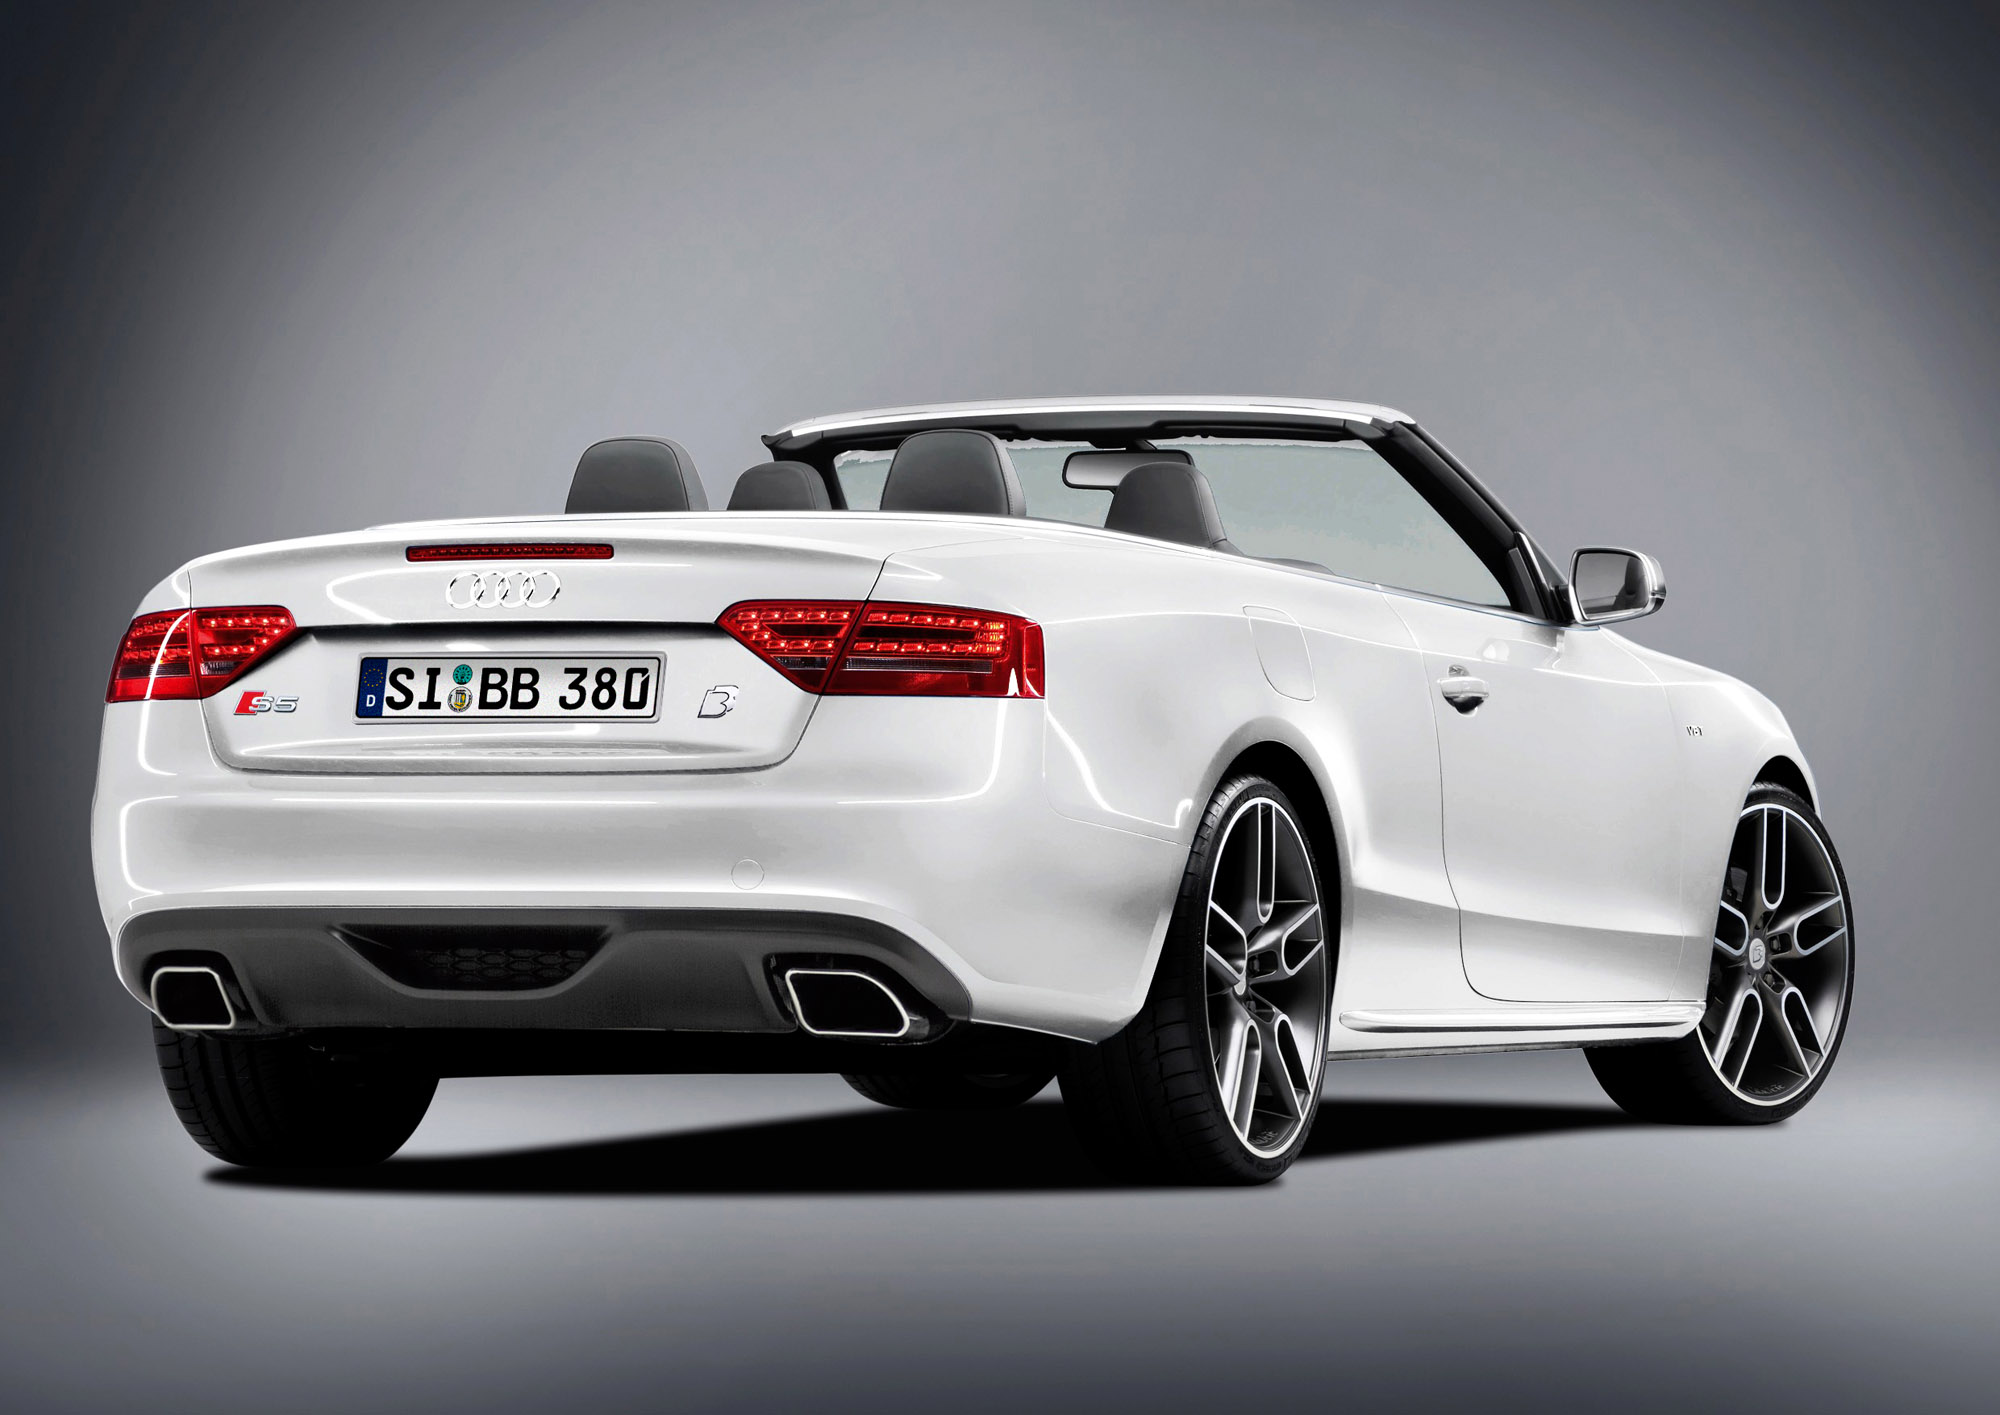 B&B Audi A5 and S5 Cabriolet